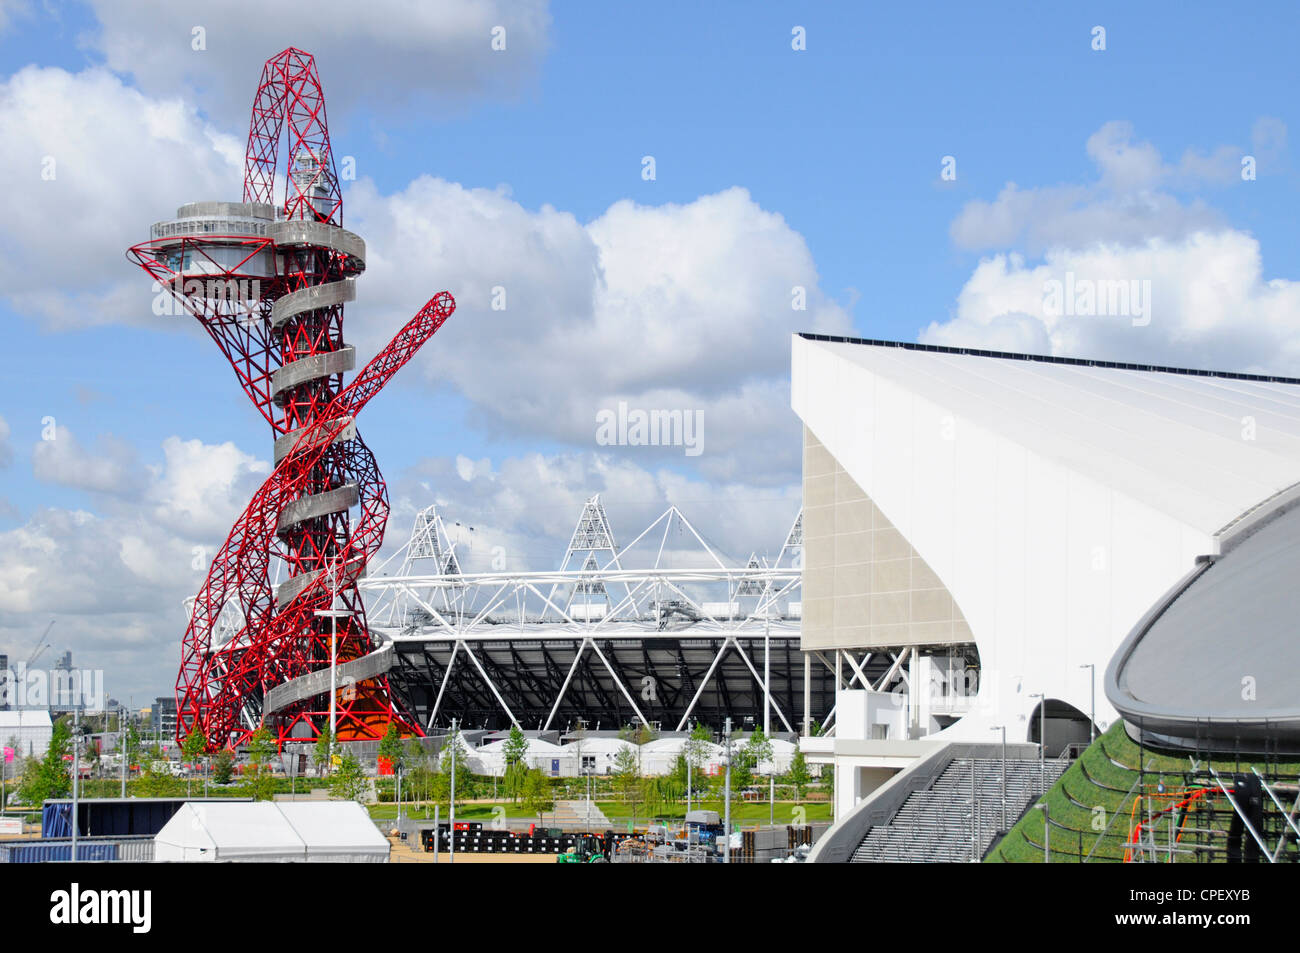 ArcelorMittal Orbit tower with part of main stadium & Aquatics Centre in The 2012 London Olympic park Stratford Newham East LondonEngland UK Stock Photo